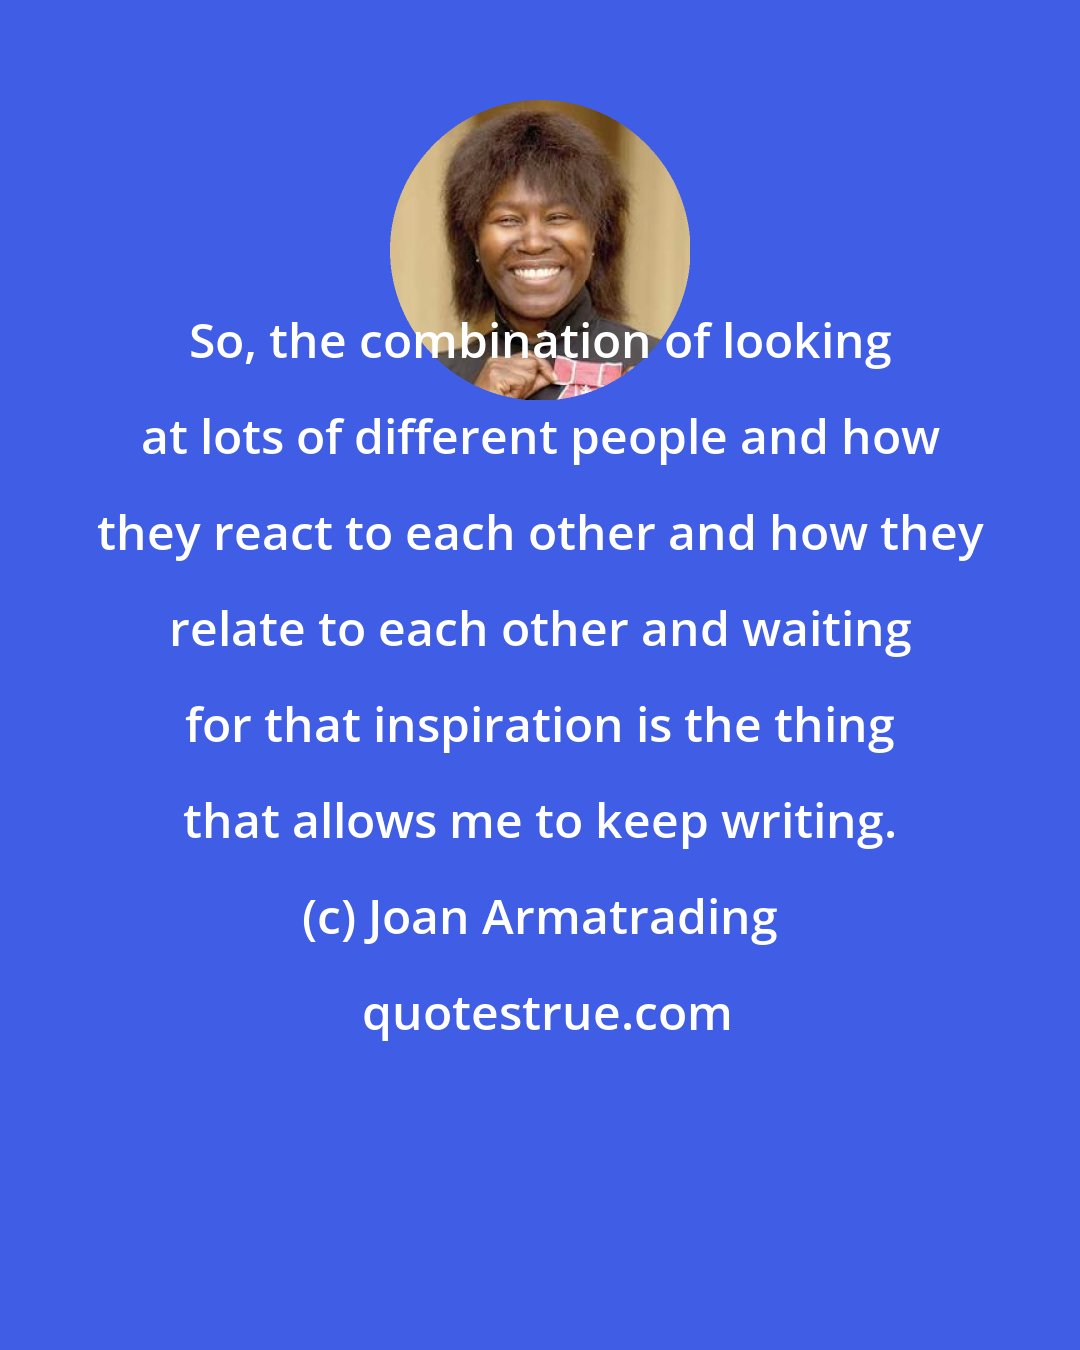 Joan Armatrading: So, the combination of looking at lots of different people and how they react to each other and how they relate to each other and waiting for that inspiration is the thing that allows me to keep writing.